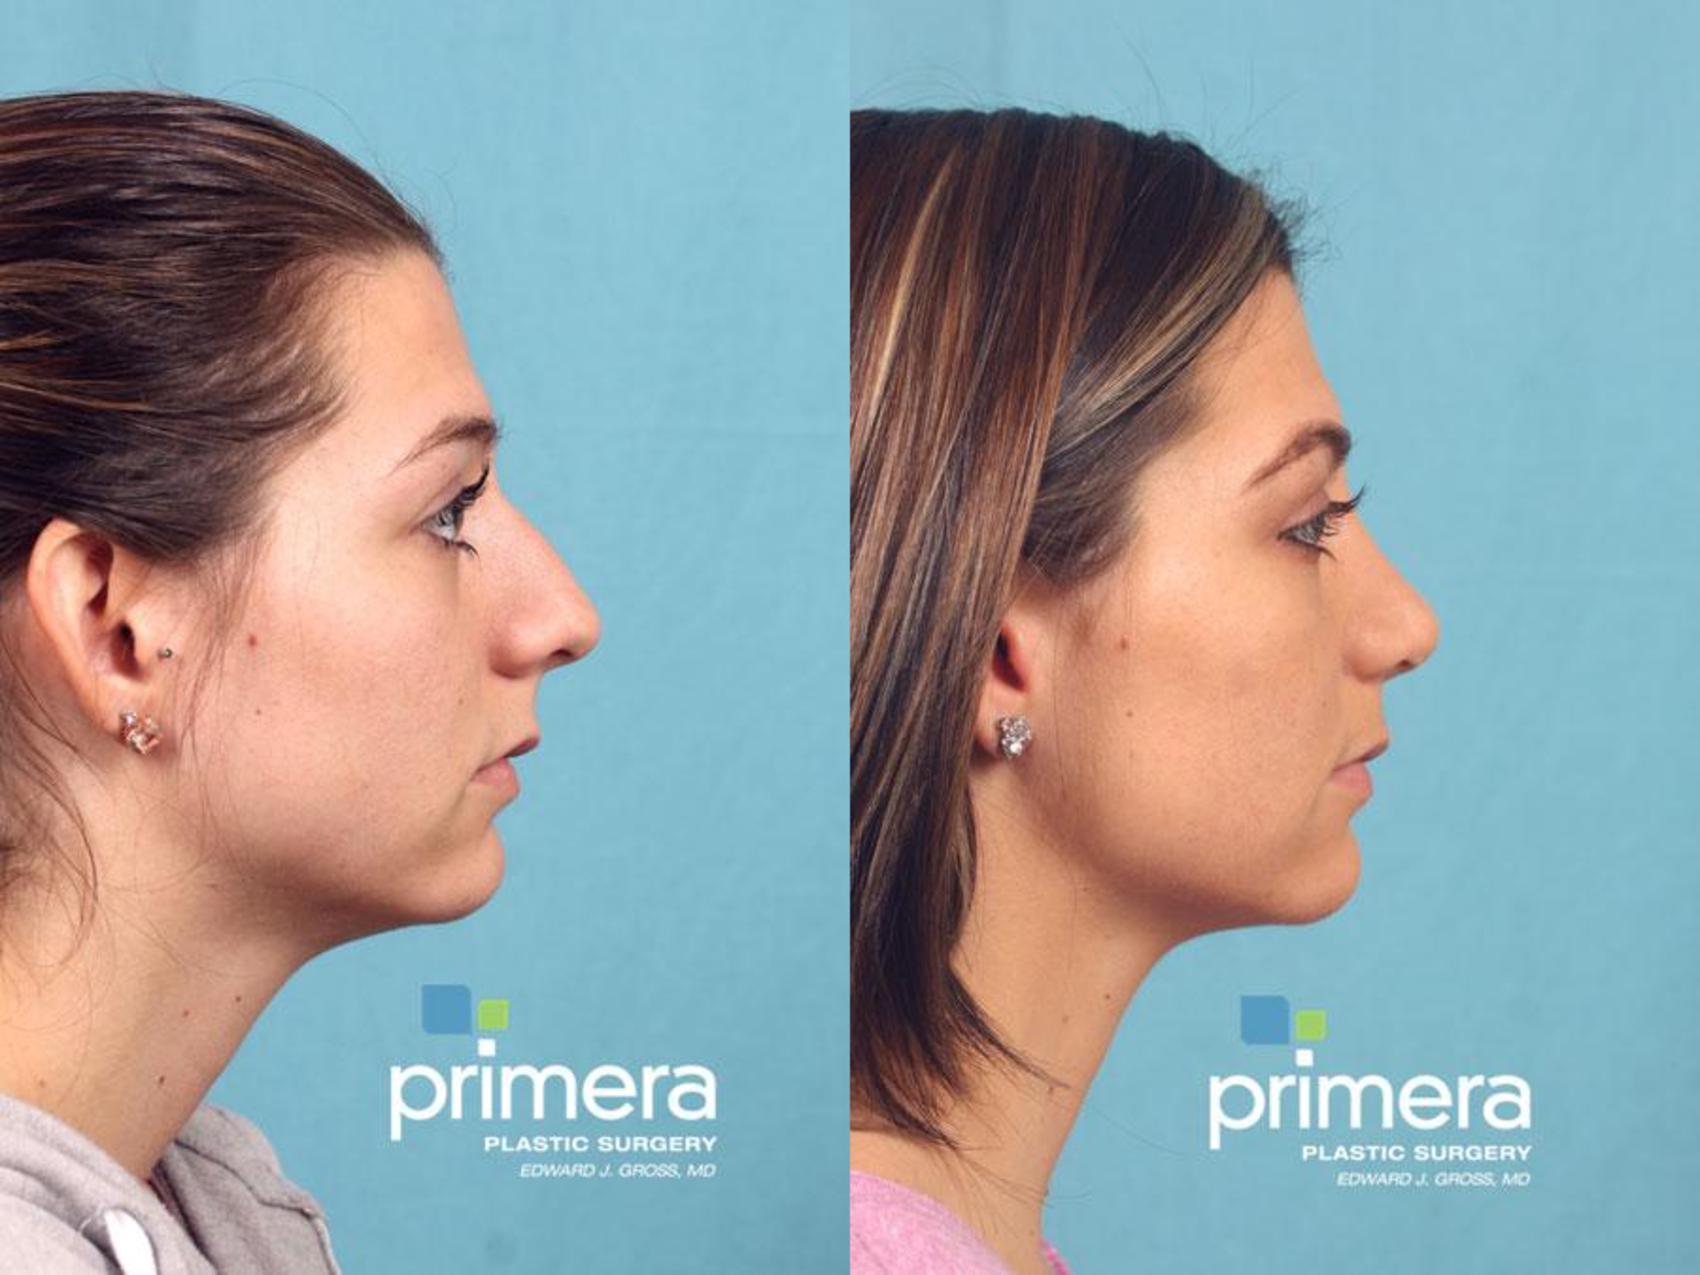 She consulted with Dr. Gross in our Orlando/ Lake Mary office to remove a l...